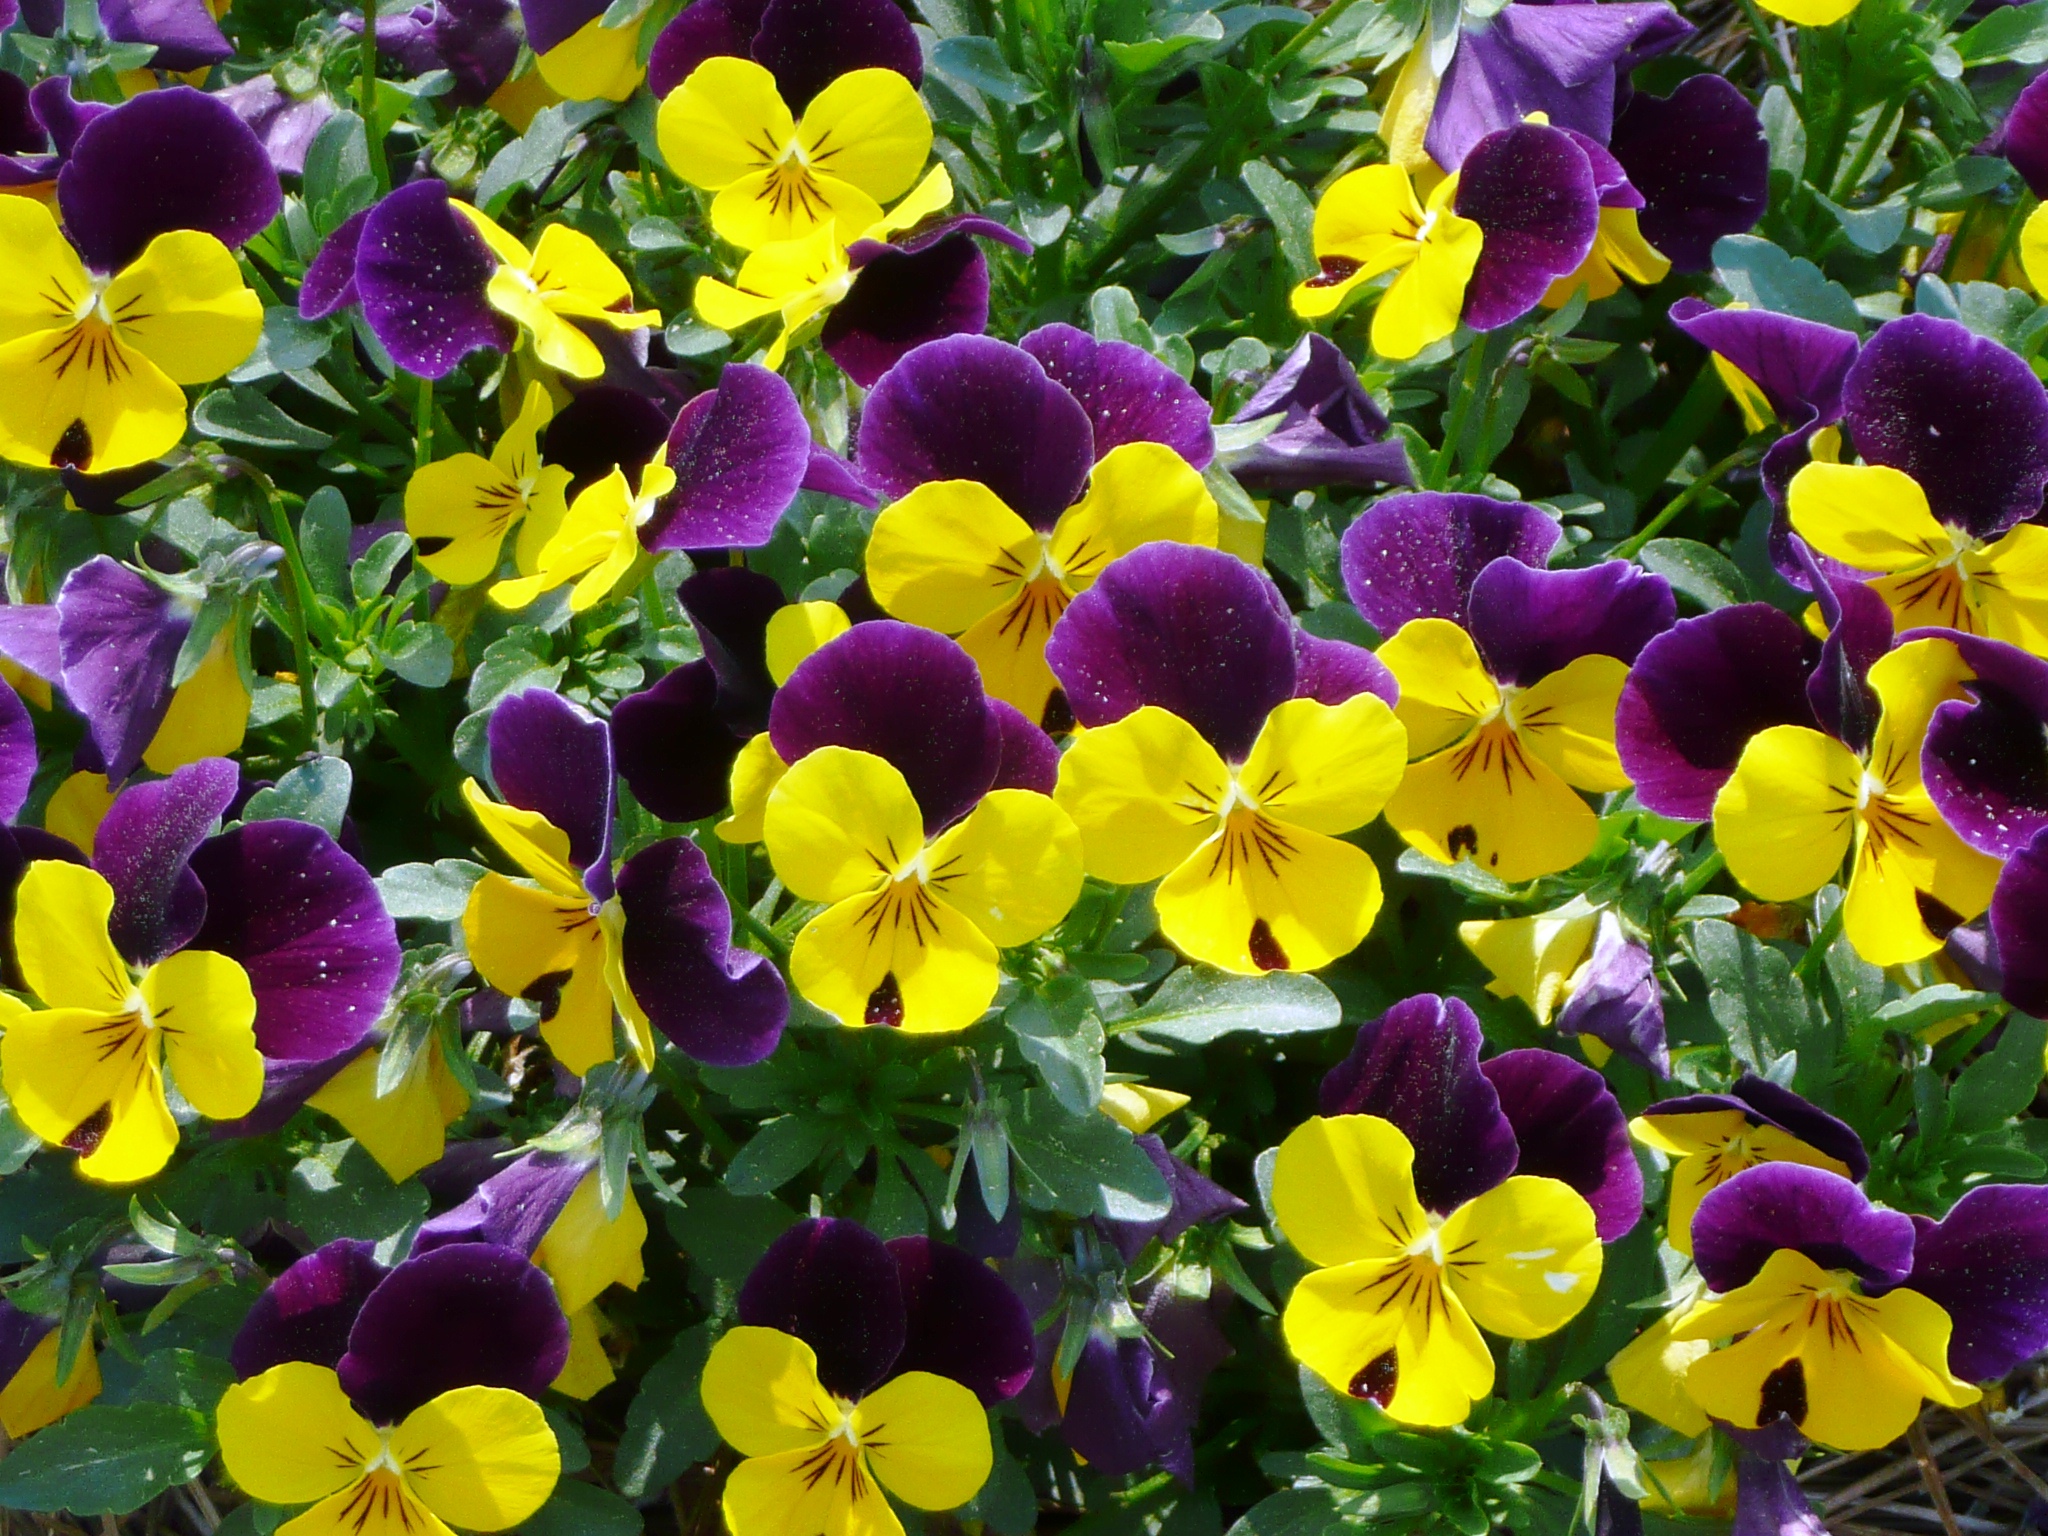 Beneath The Petals Fun Facts About Pansies And Violas The Plant Farm